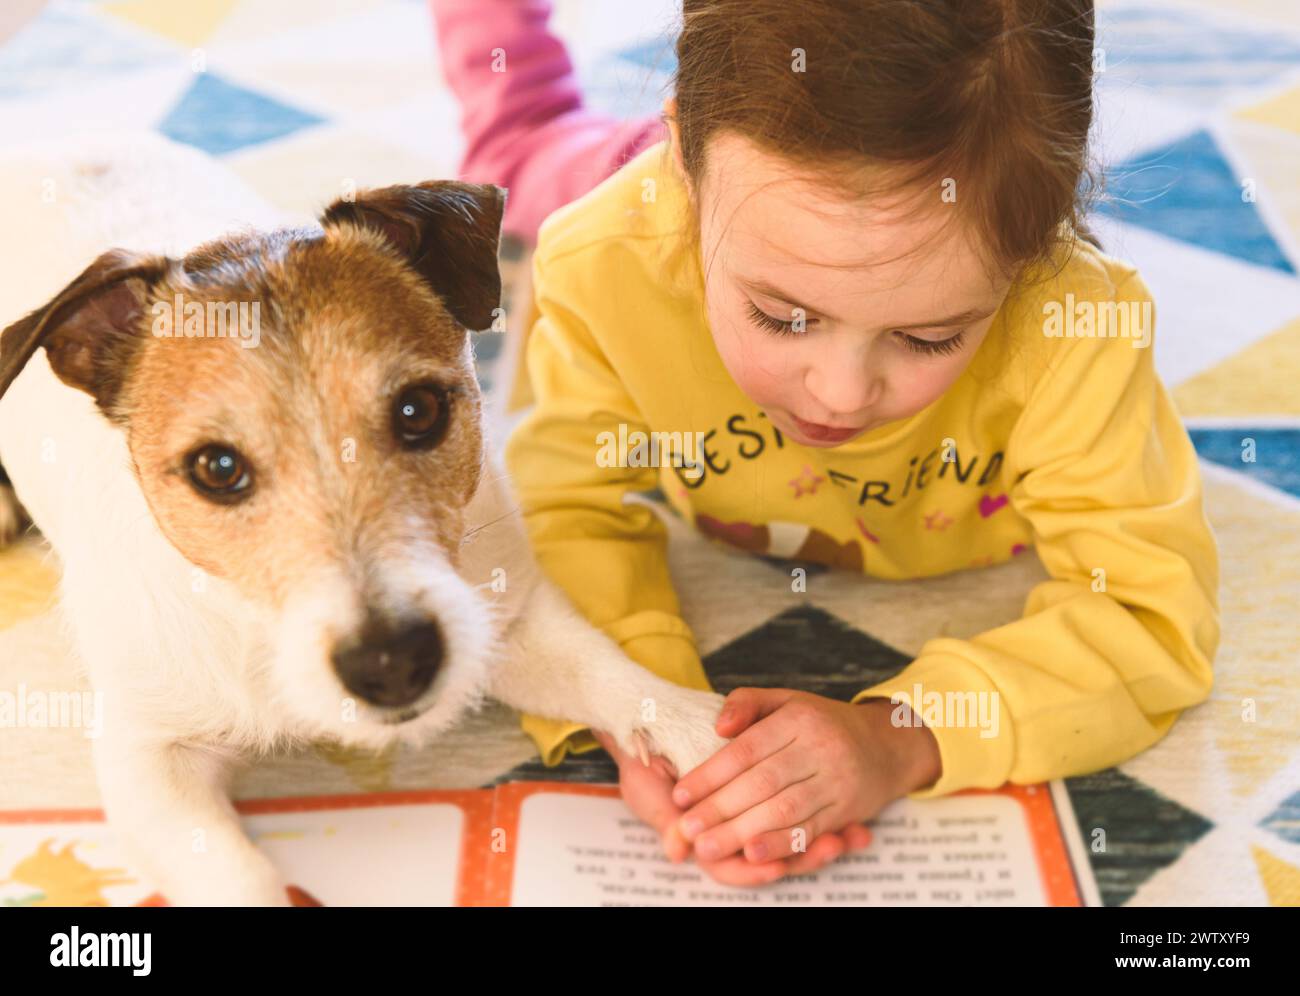 Small girl learning to read. Kid is reading a book to her pet dog. Stock Photo